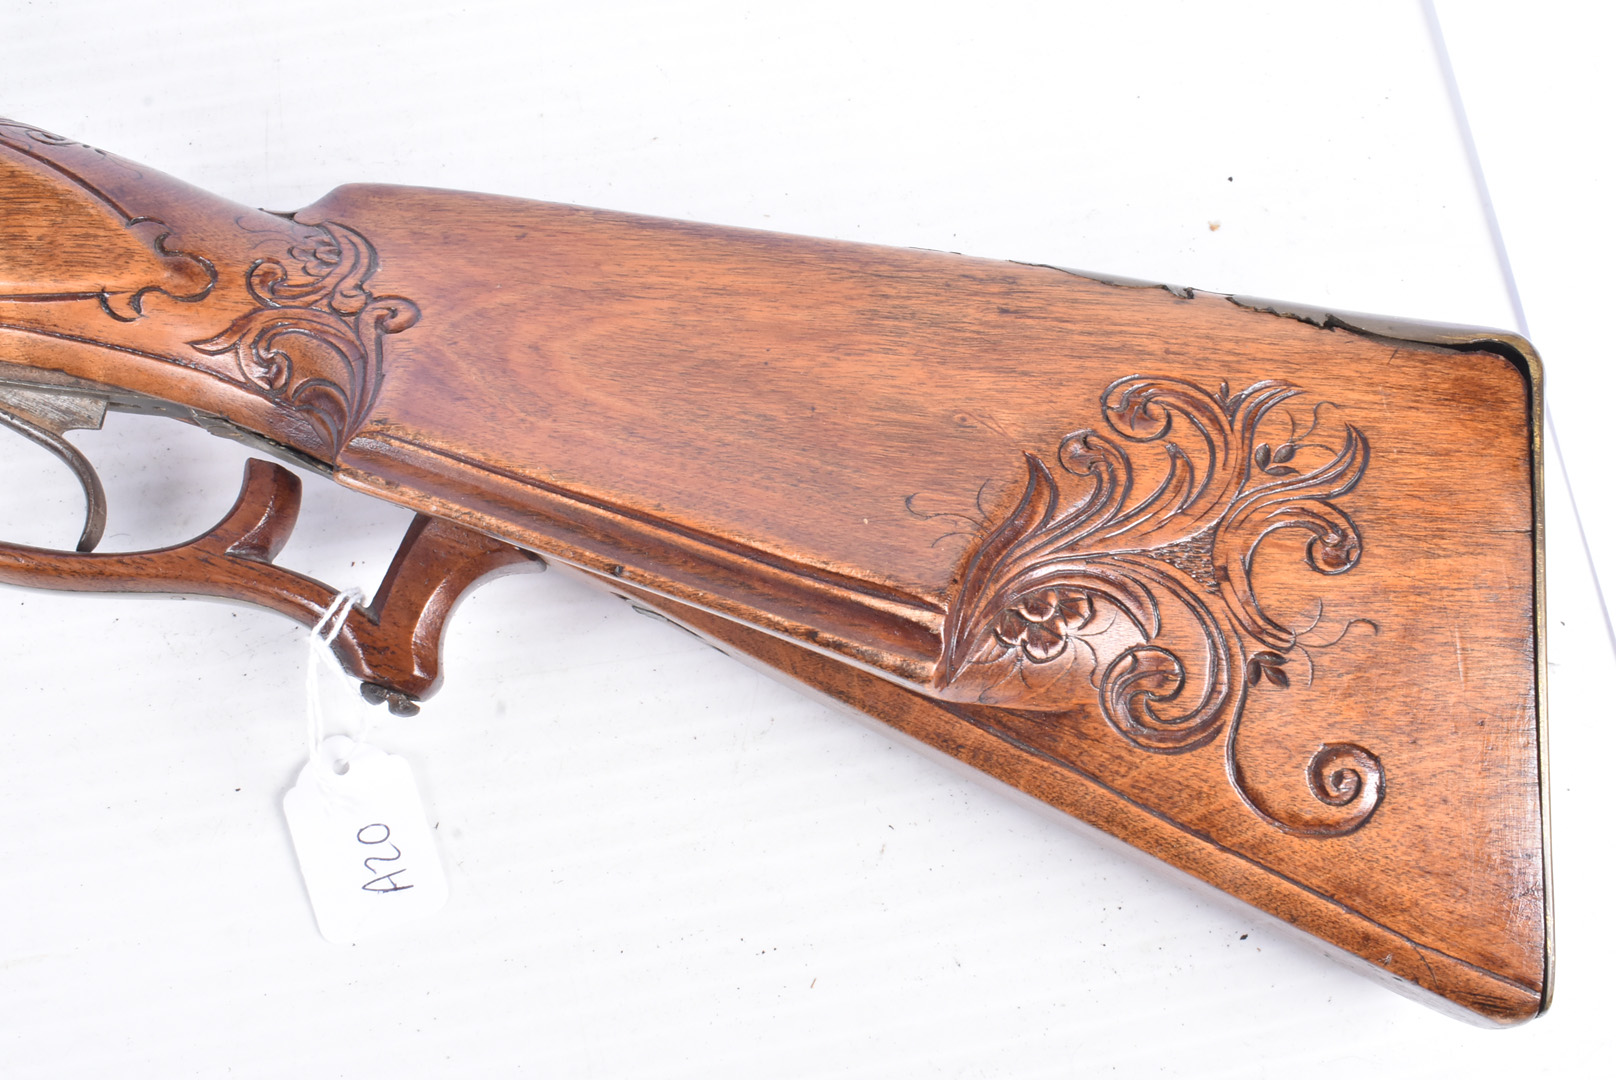 An Reproduction Austrian Decorative percussion cap carbine, with decoratively carved wooden stock, - Image 3 of 6